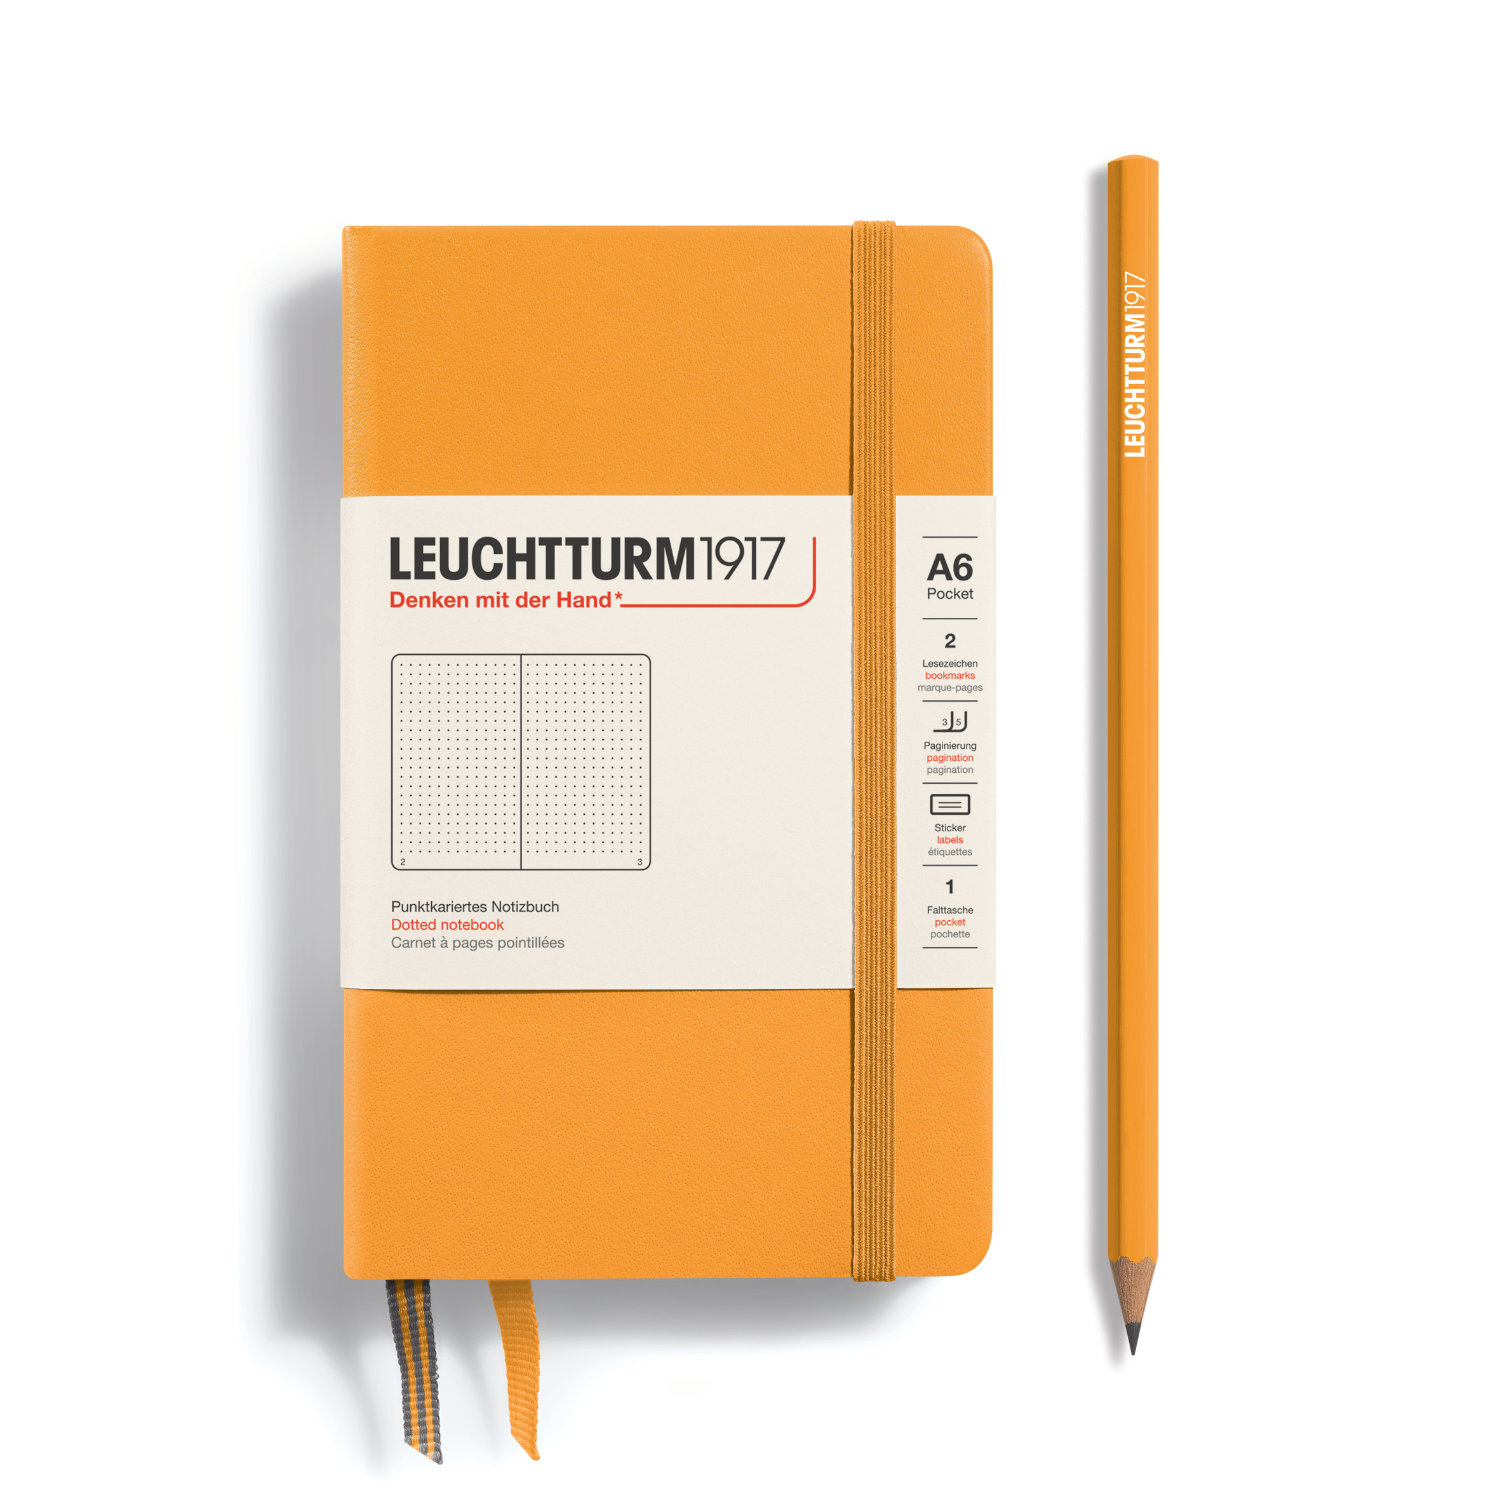 Notizbuch Pocket dotted Hardcover A6